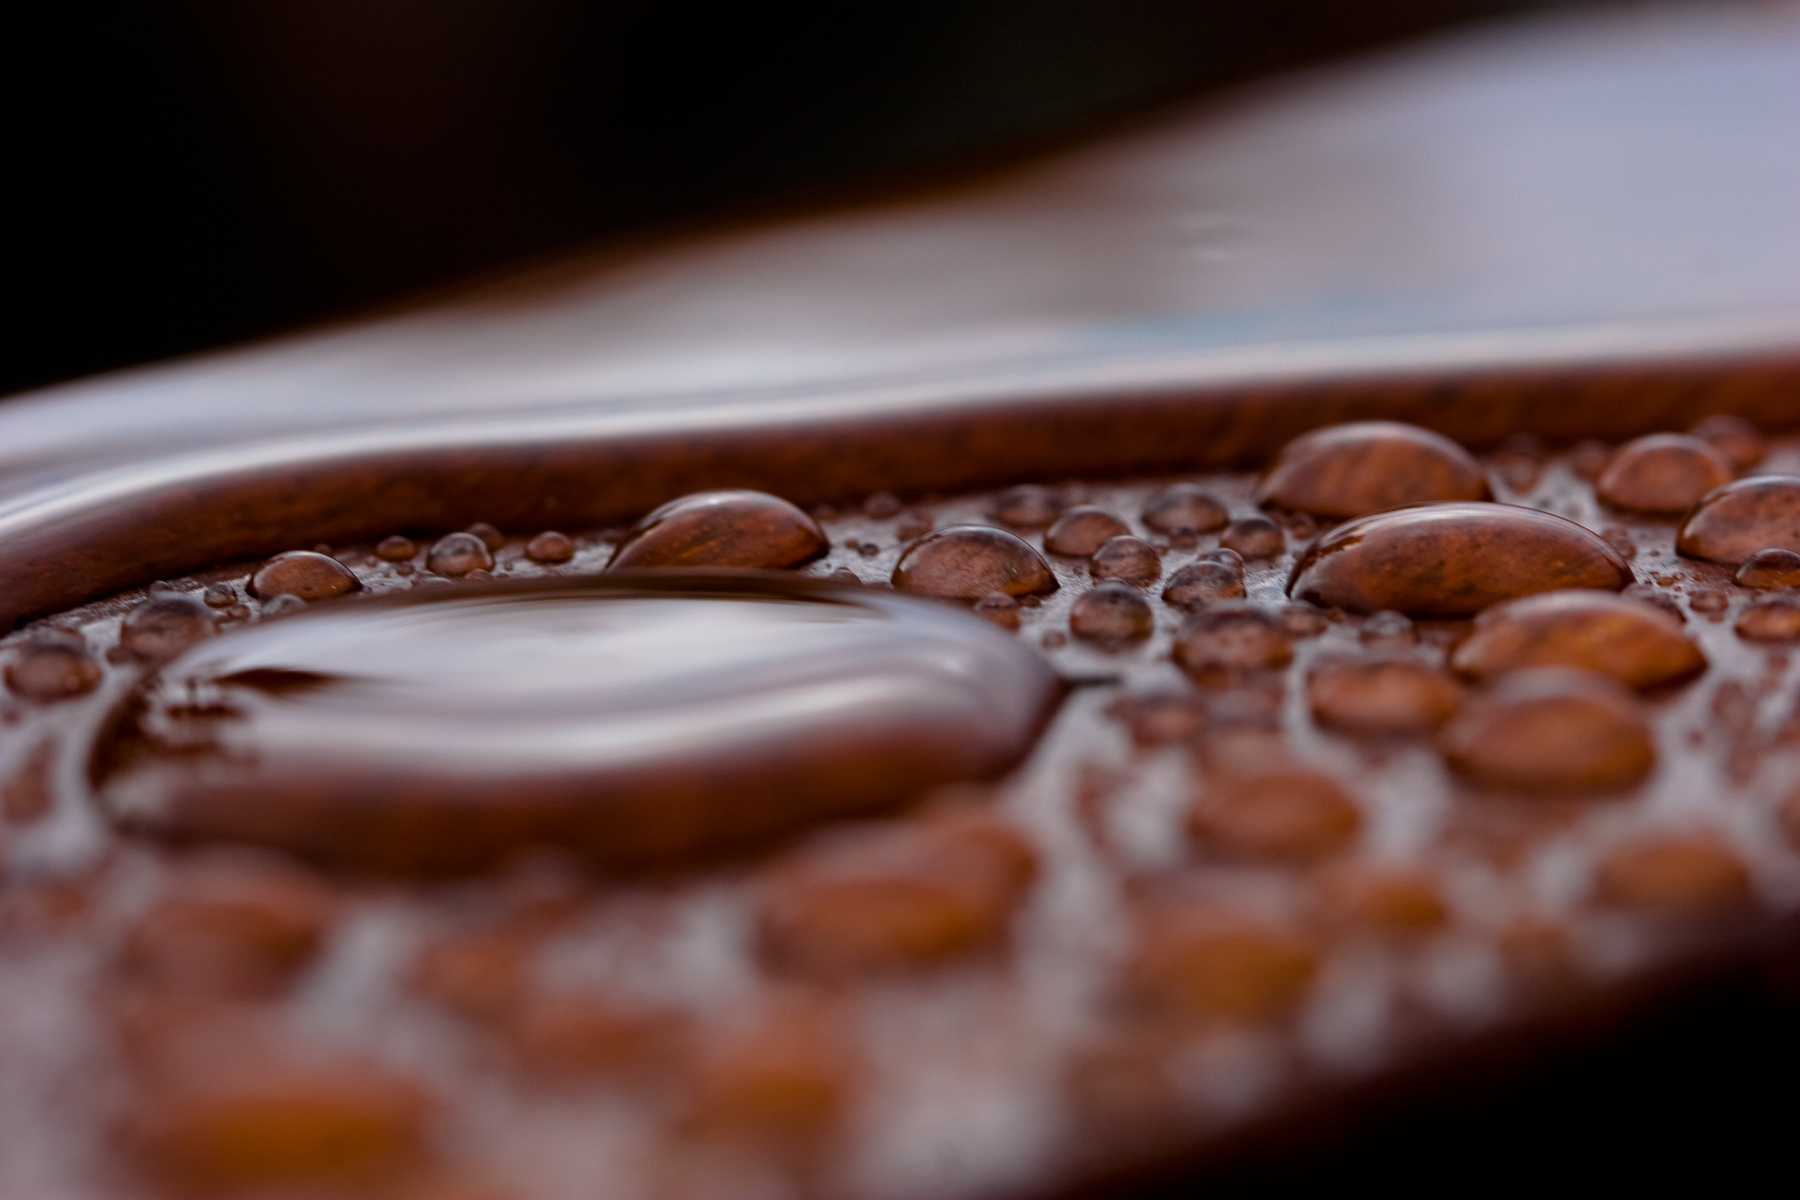 Droplets on wood, Abstract, Backgrounds, Blur, Closeup, HQ Photo